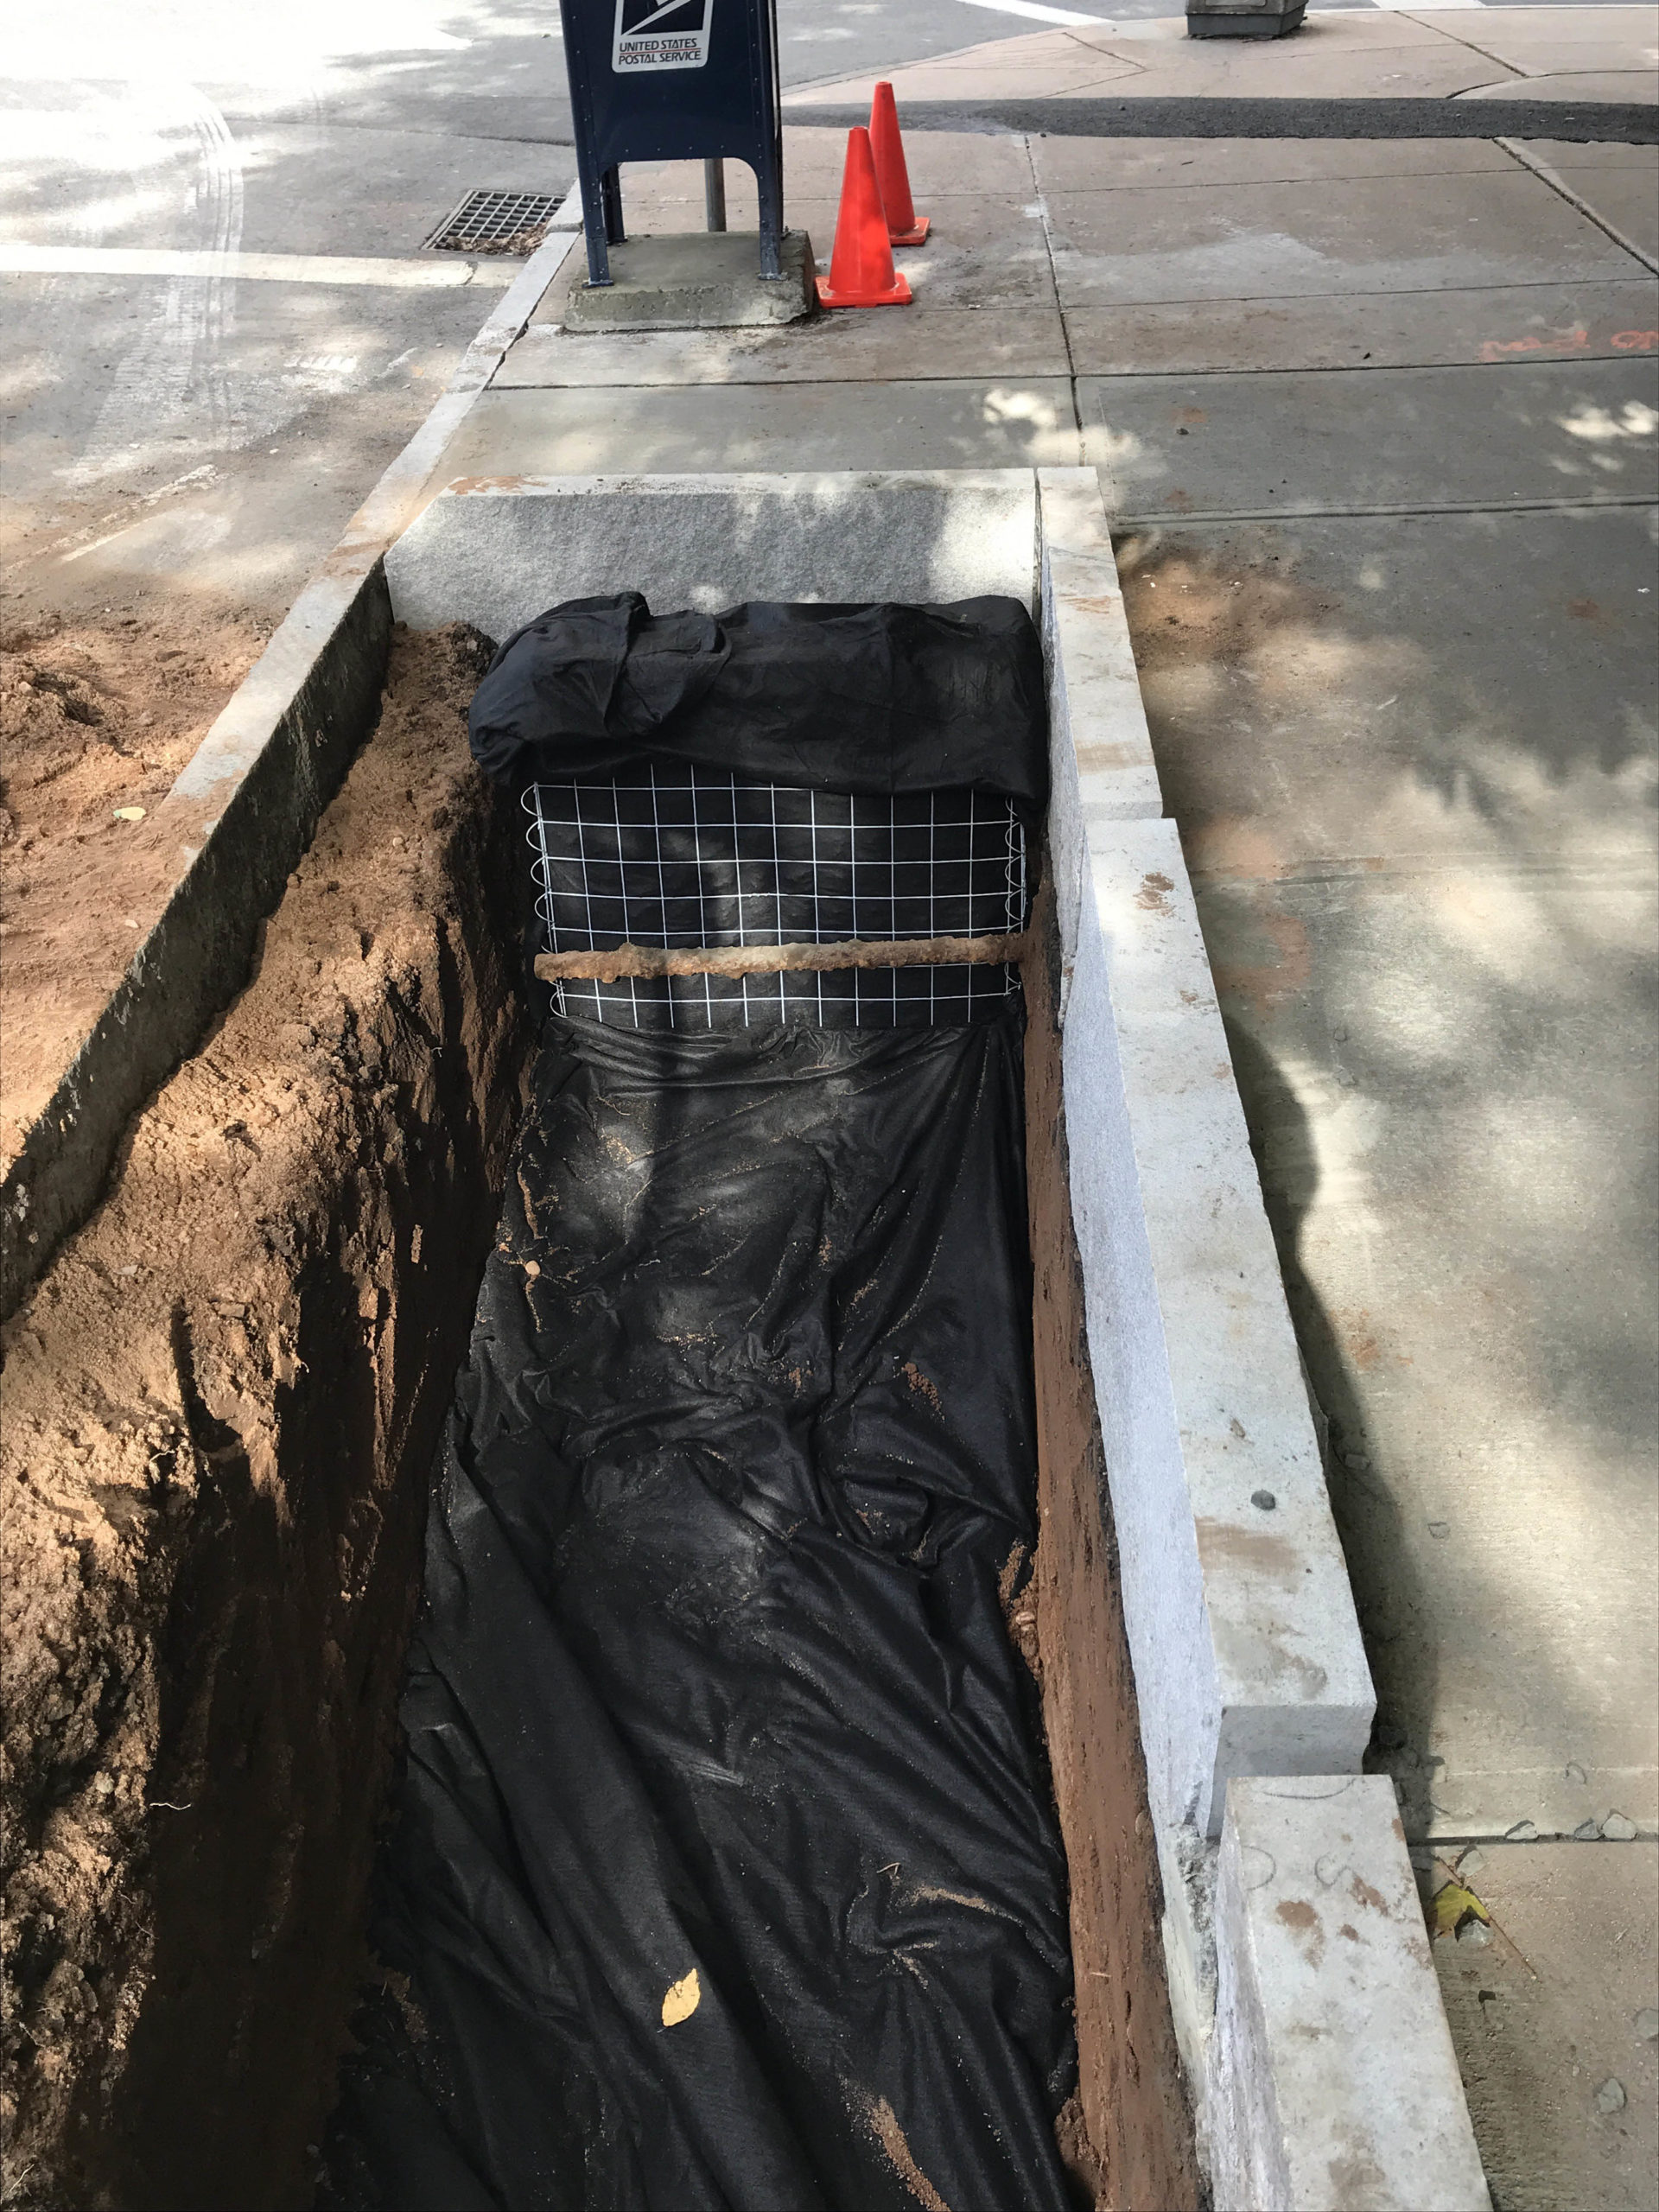 A bioswale is prepared and filled with coarse gravel. The gravel and gabion of the bioswale are wrapped in a permeable geotextile fabric.